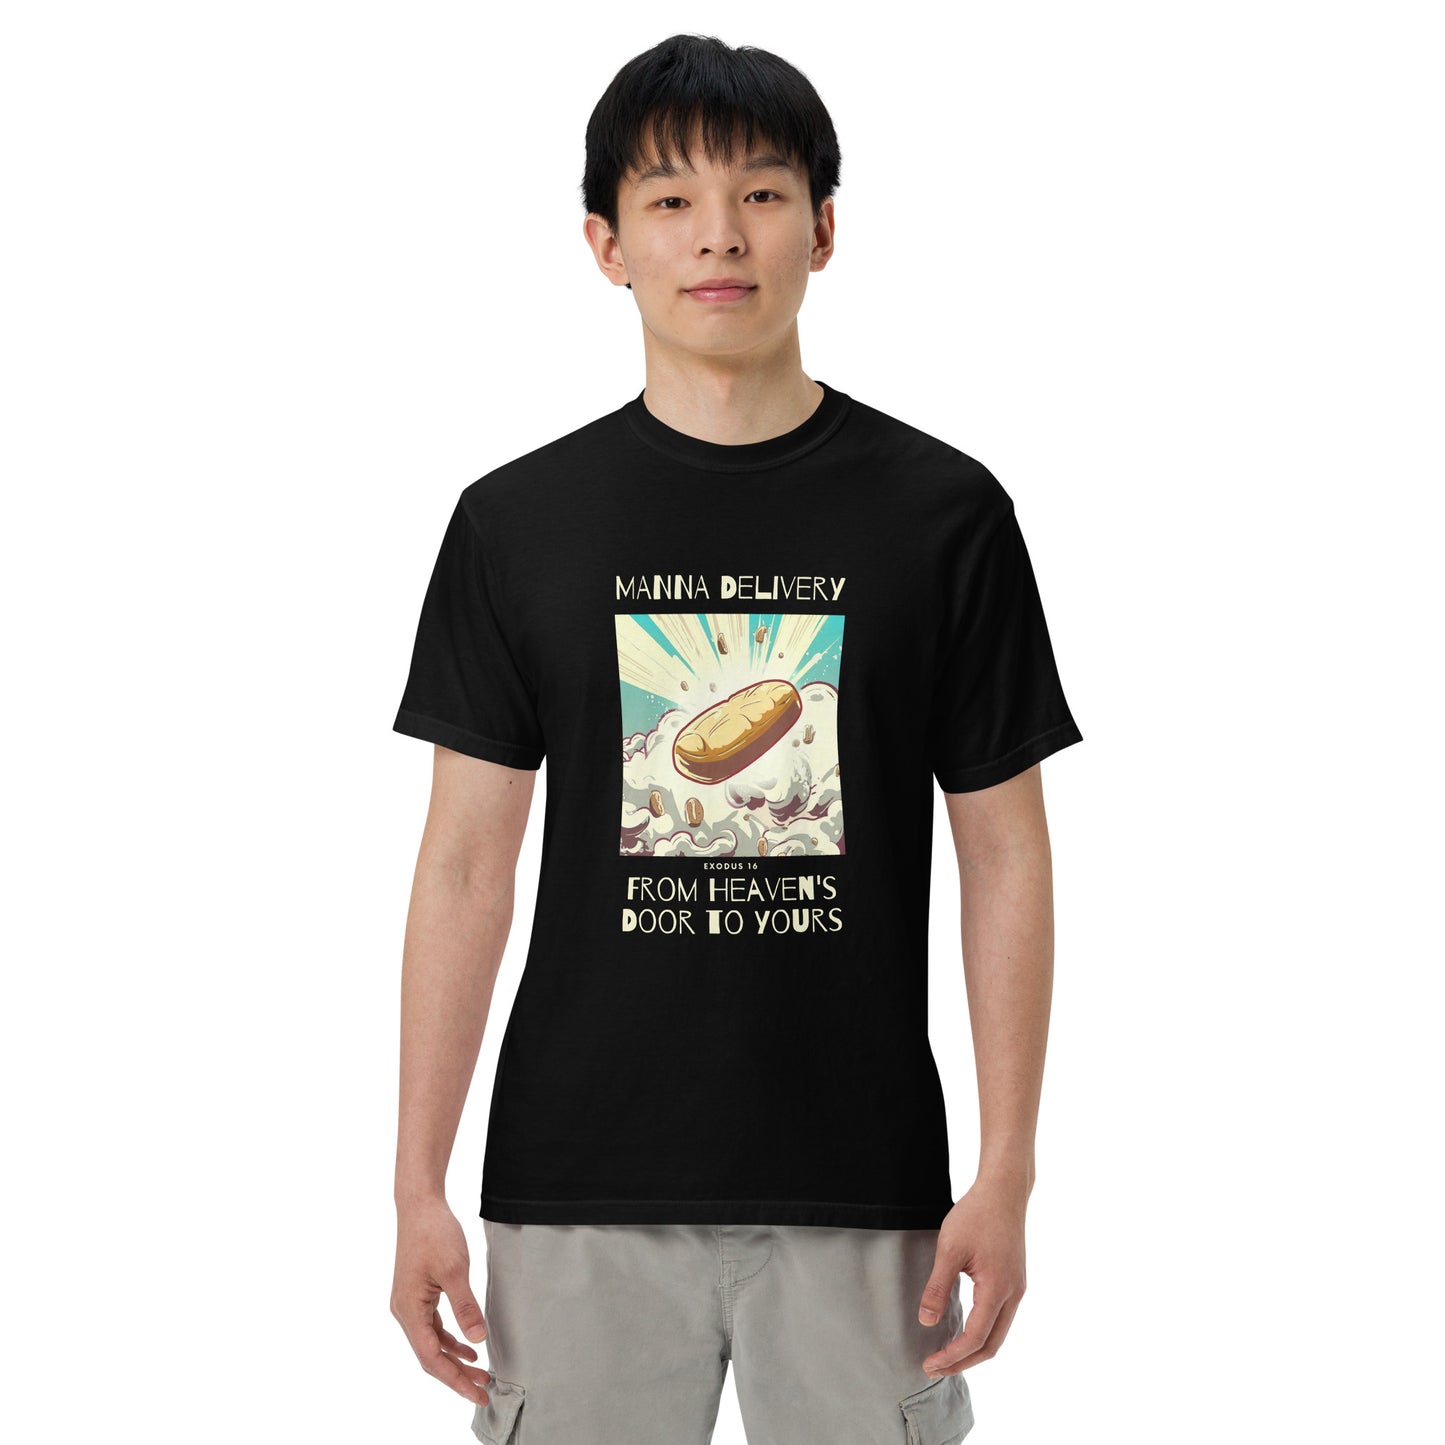 Manna Delivery "From Heaven's Door to Yours" (Yellow Print) Men’s Comfort Colors T-Shirt